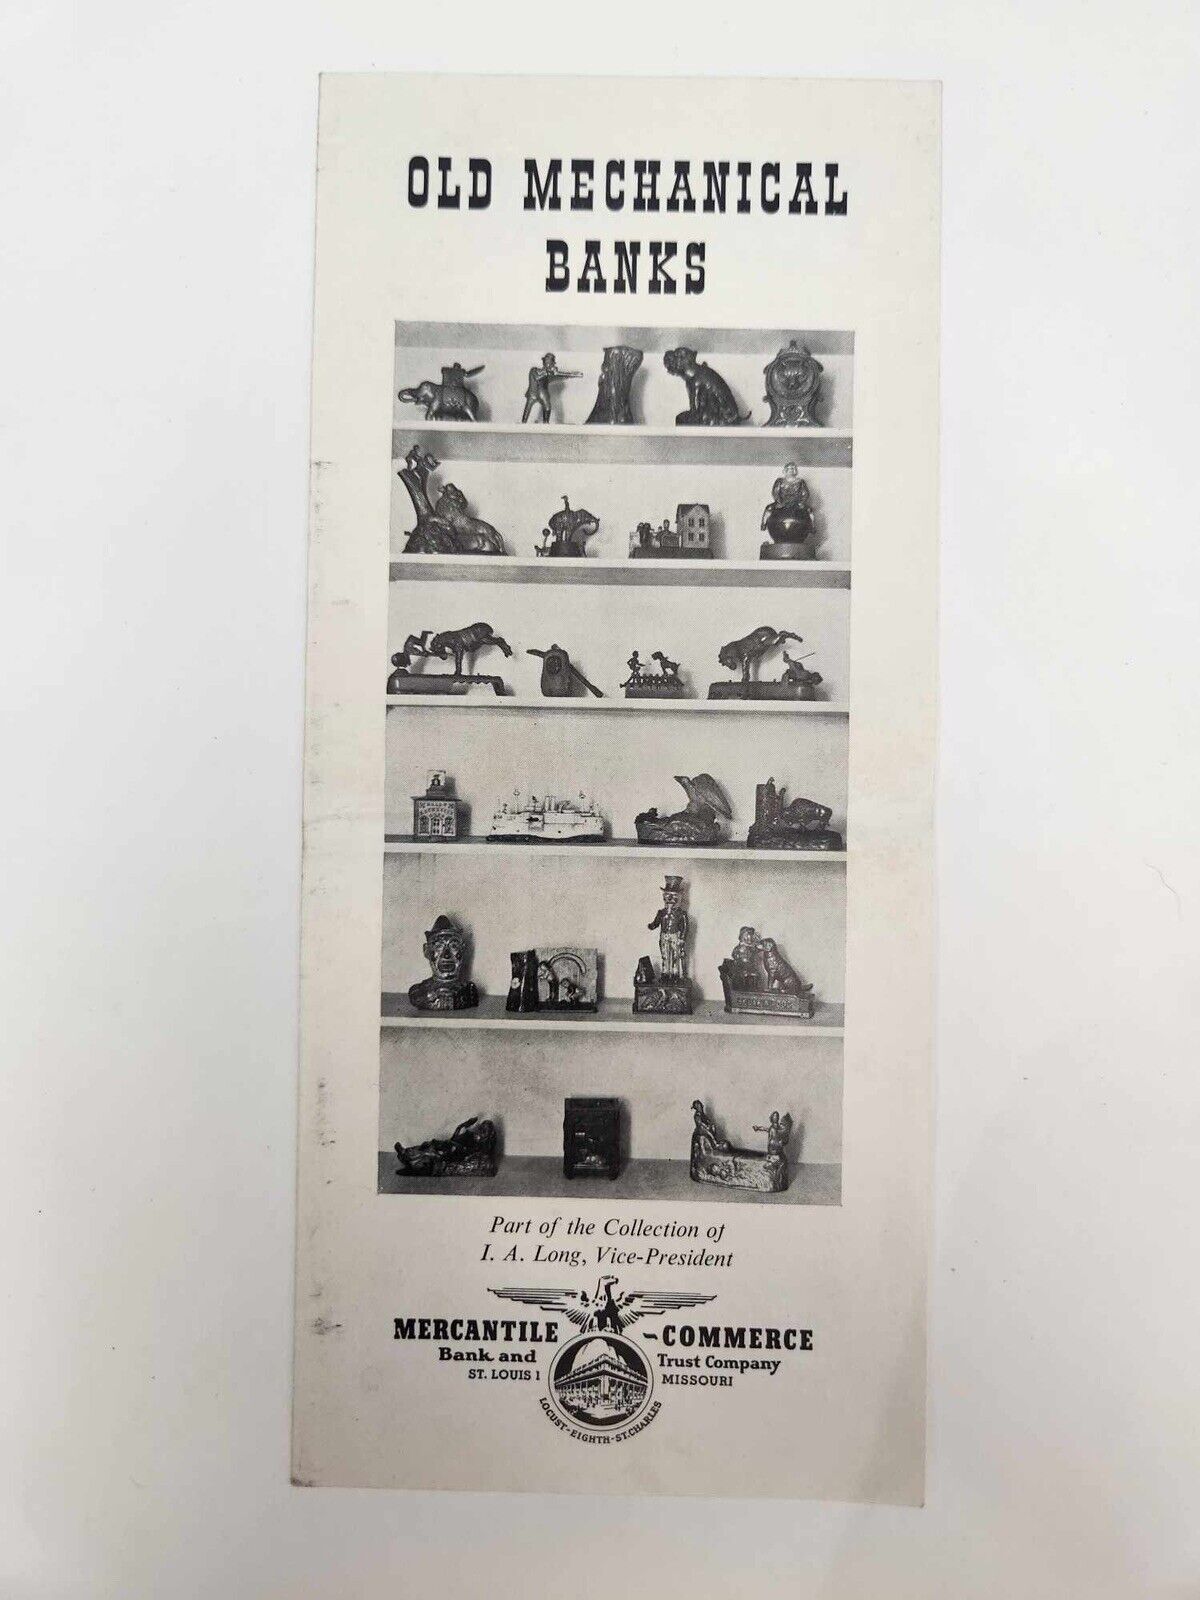 Vintage 1940's Old Mechanical Bank Collection Booklet Mercantile Commerce Bank